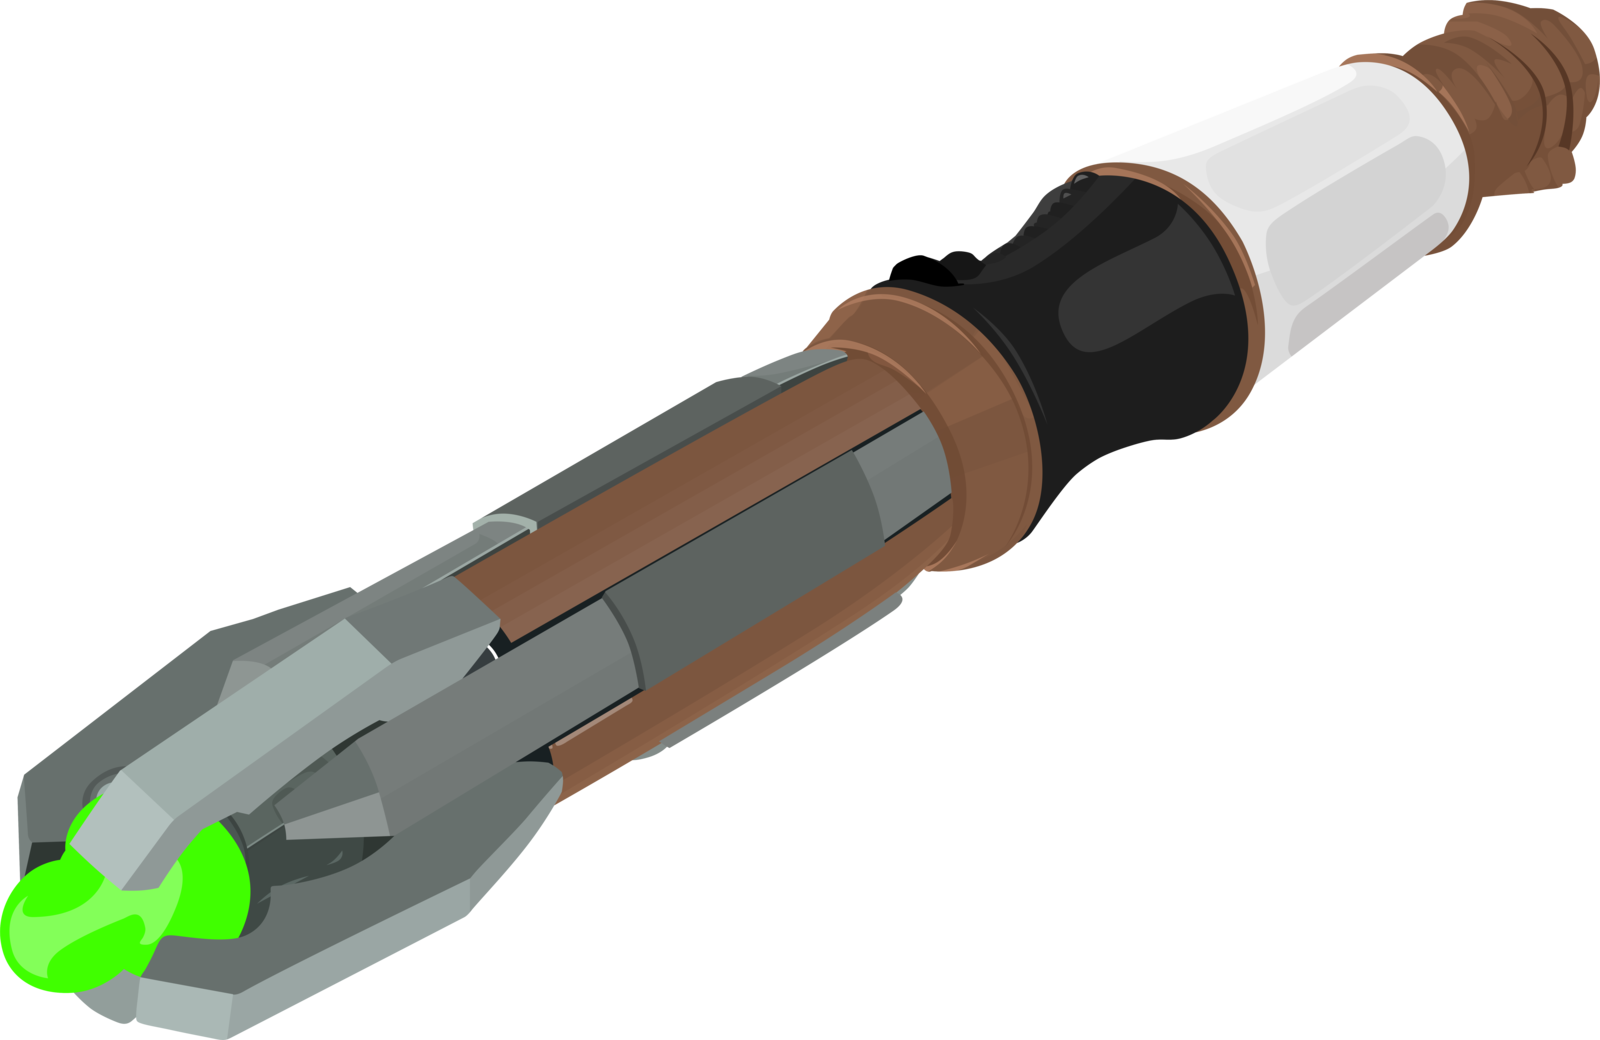  collection of th. Screwdriver clipart flat head screwdriver